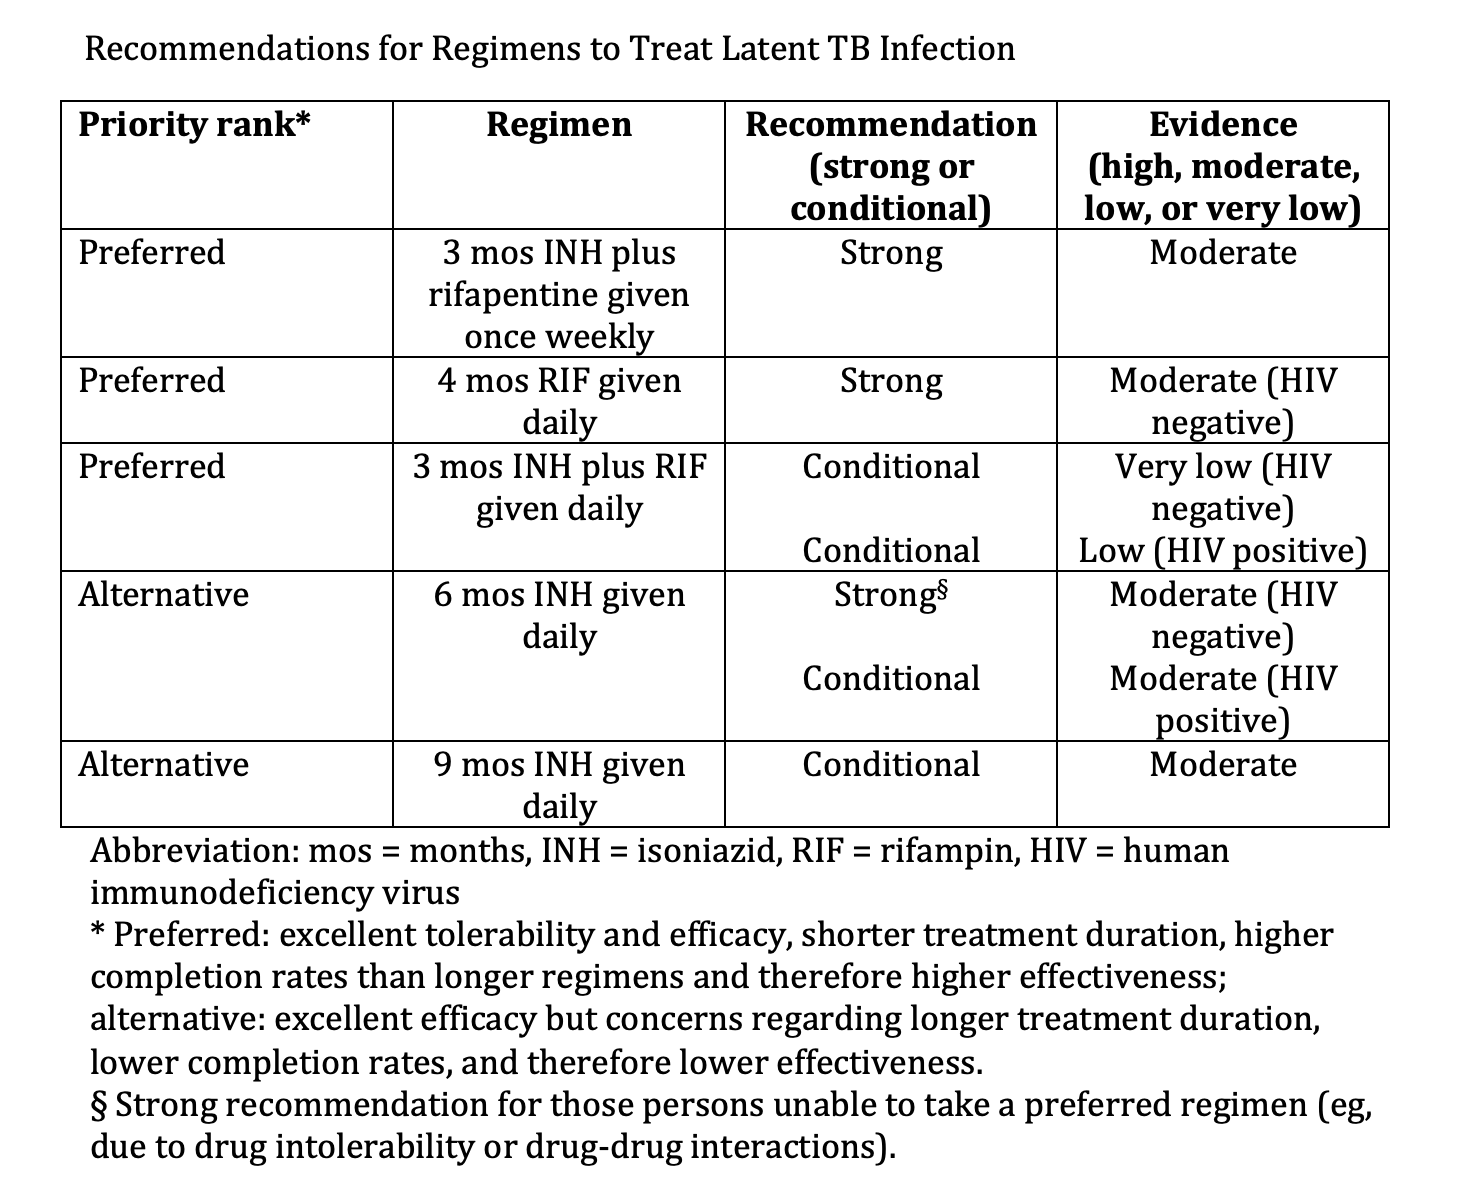 <p>Recommendations for Regimens to Treat Latent TB Infection</p>